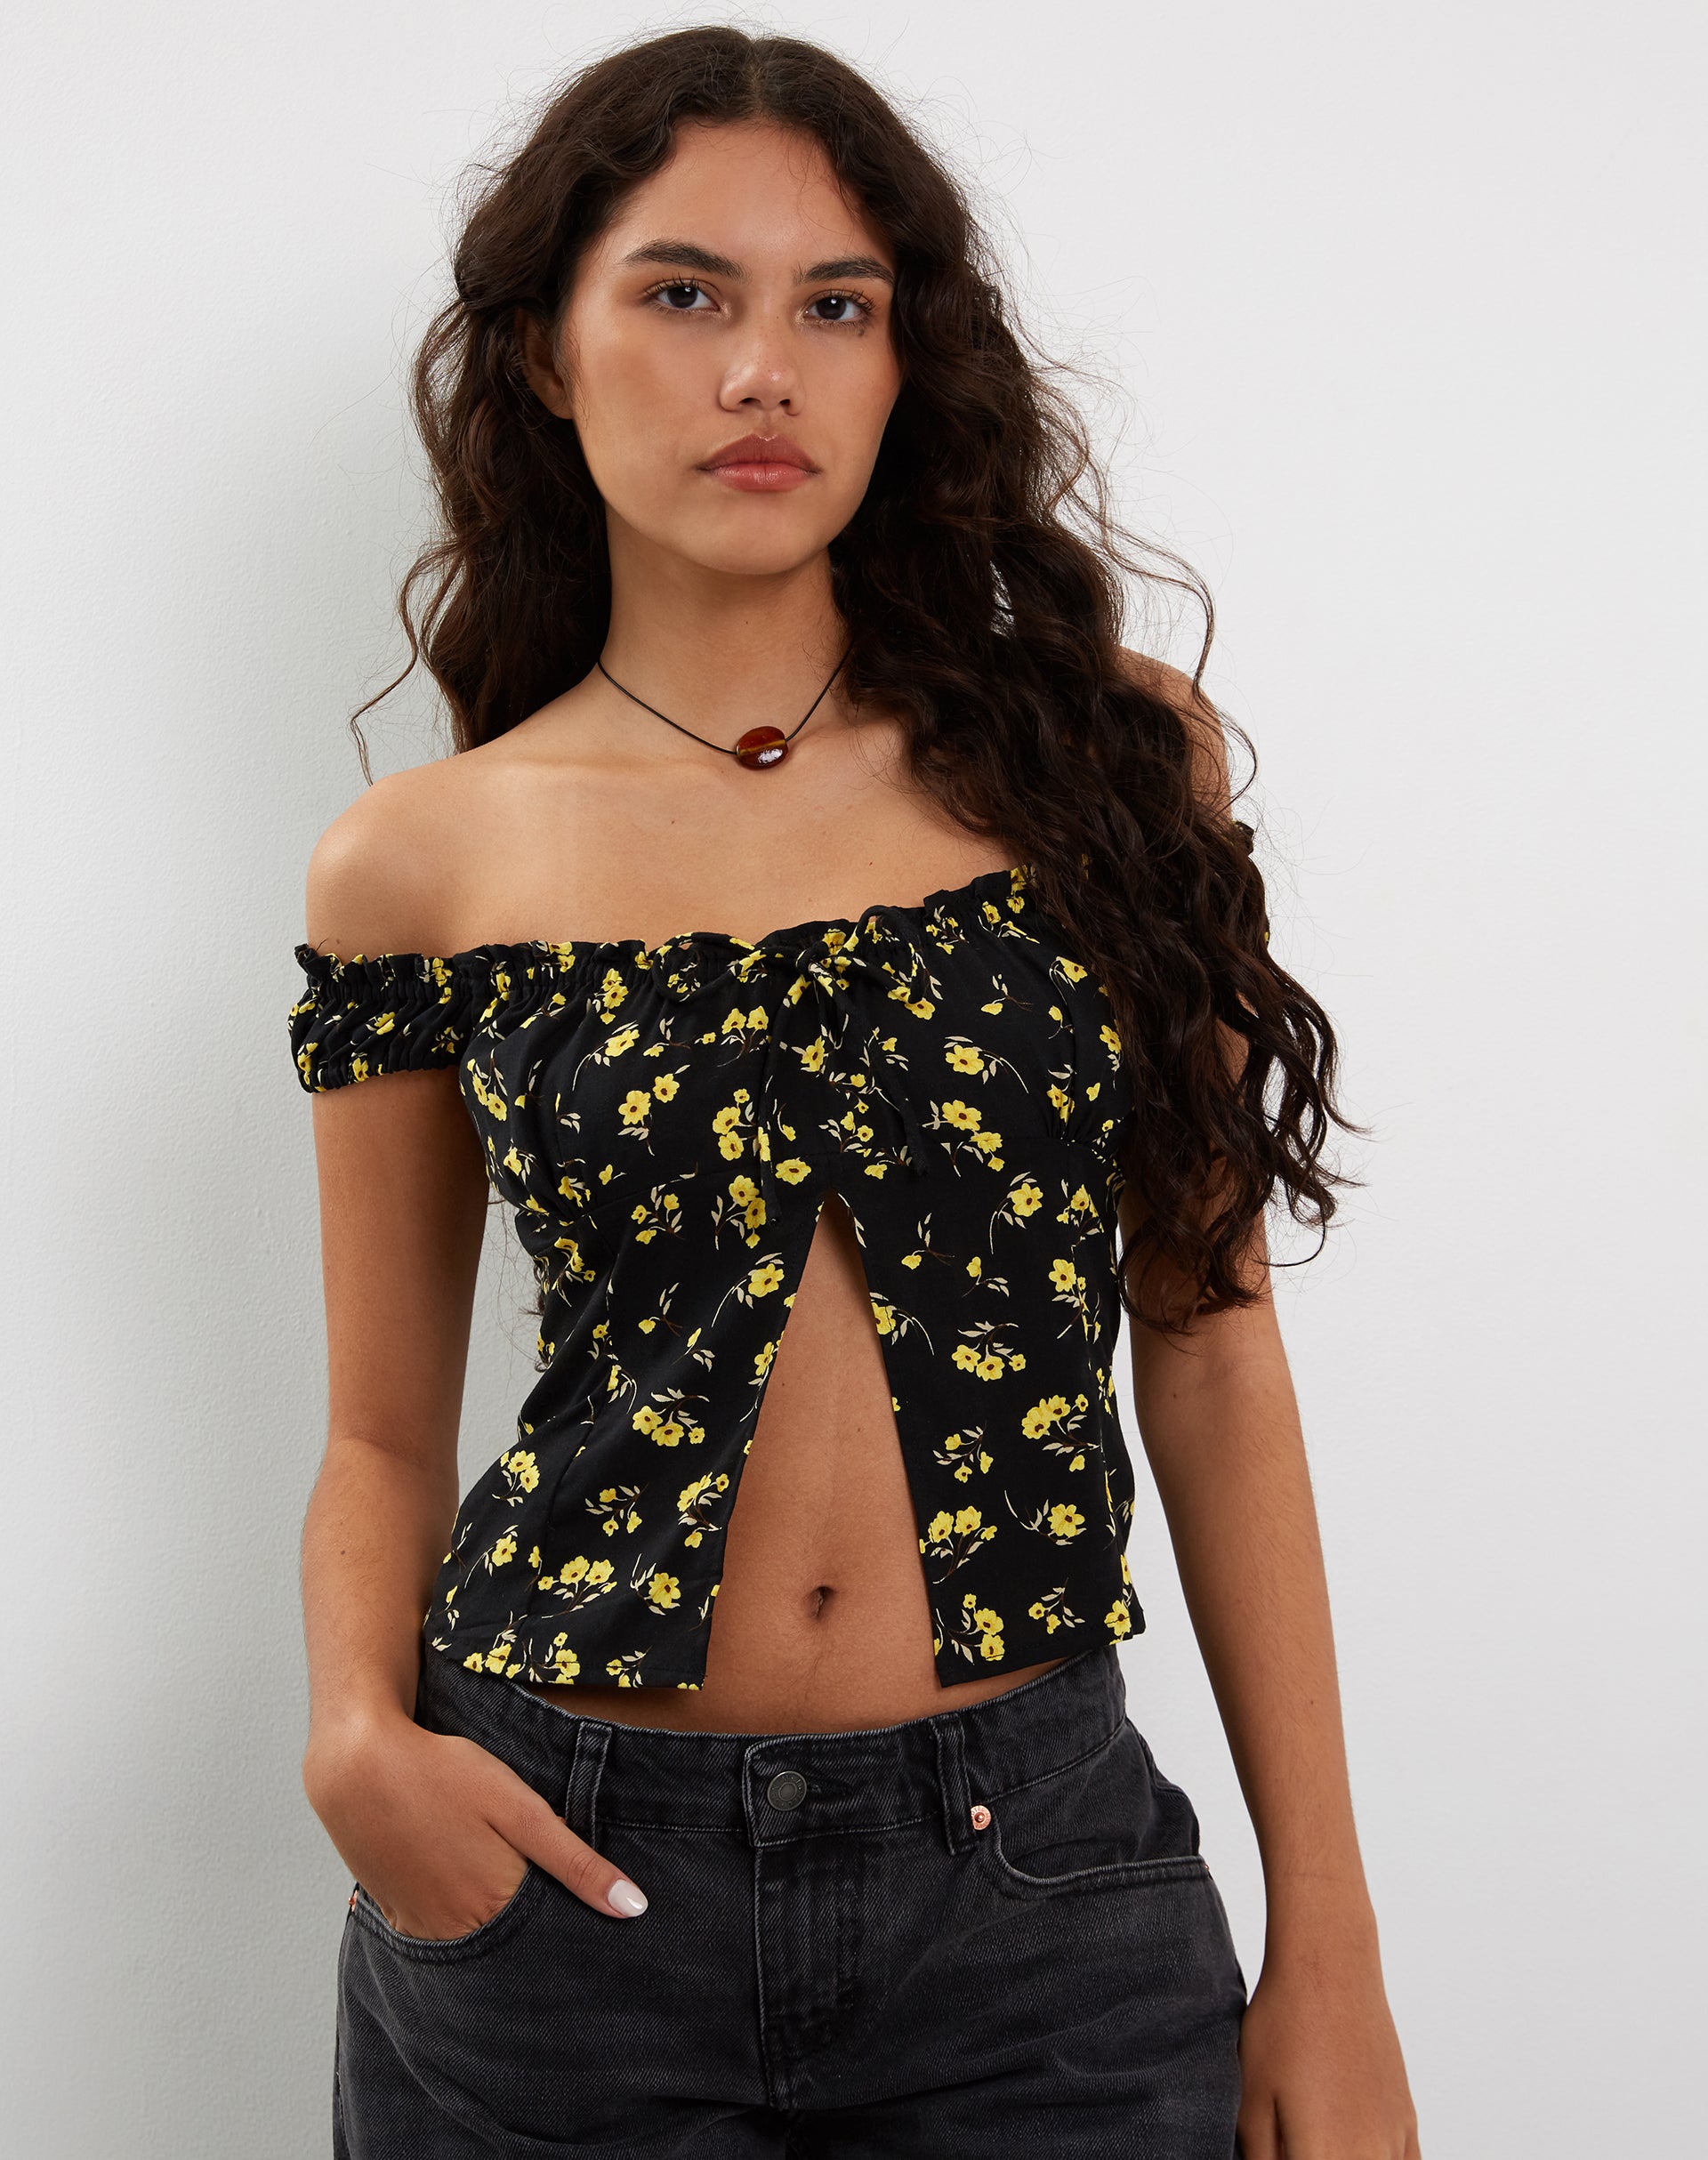 Image of Citra Bardot Frill Top in Buttercup Black Yellow